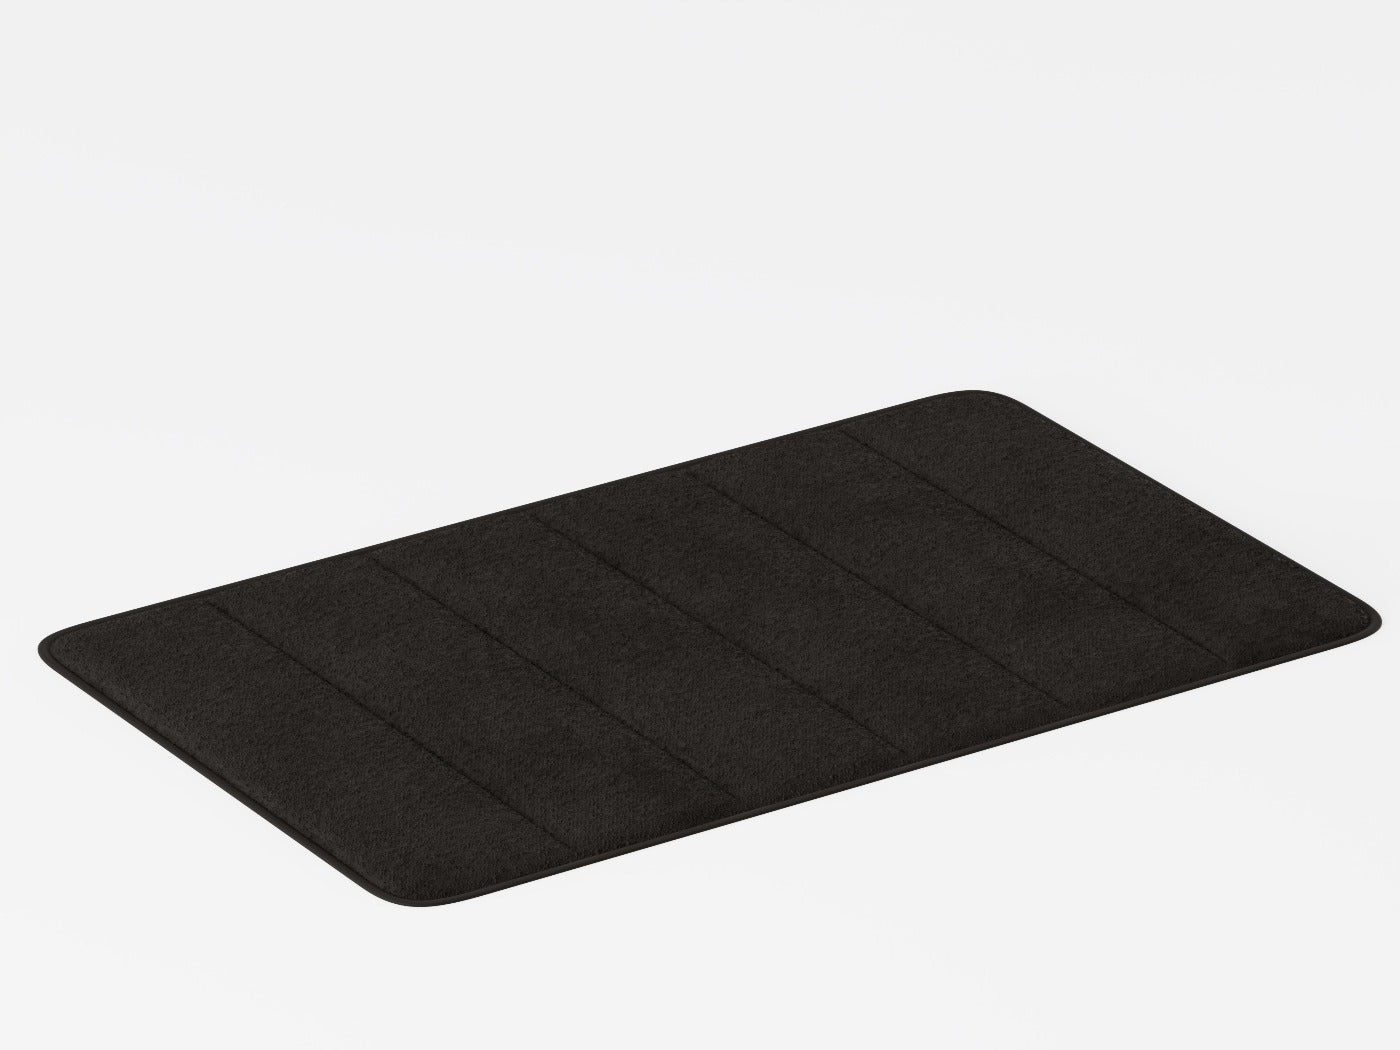 Water Absorbing Mat – The Pod Company